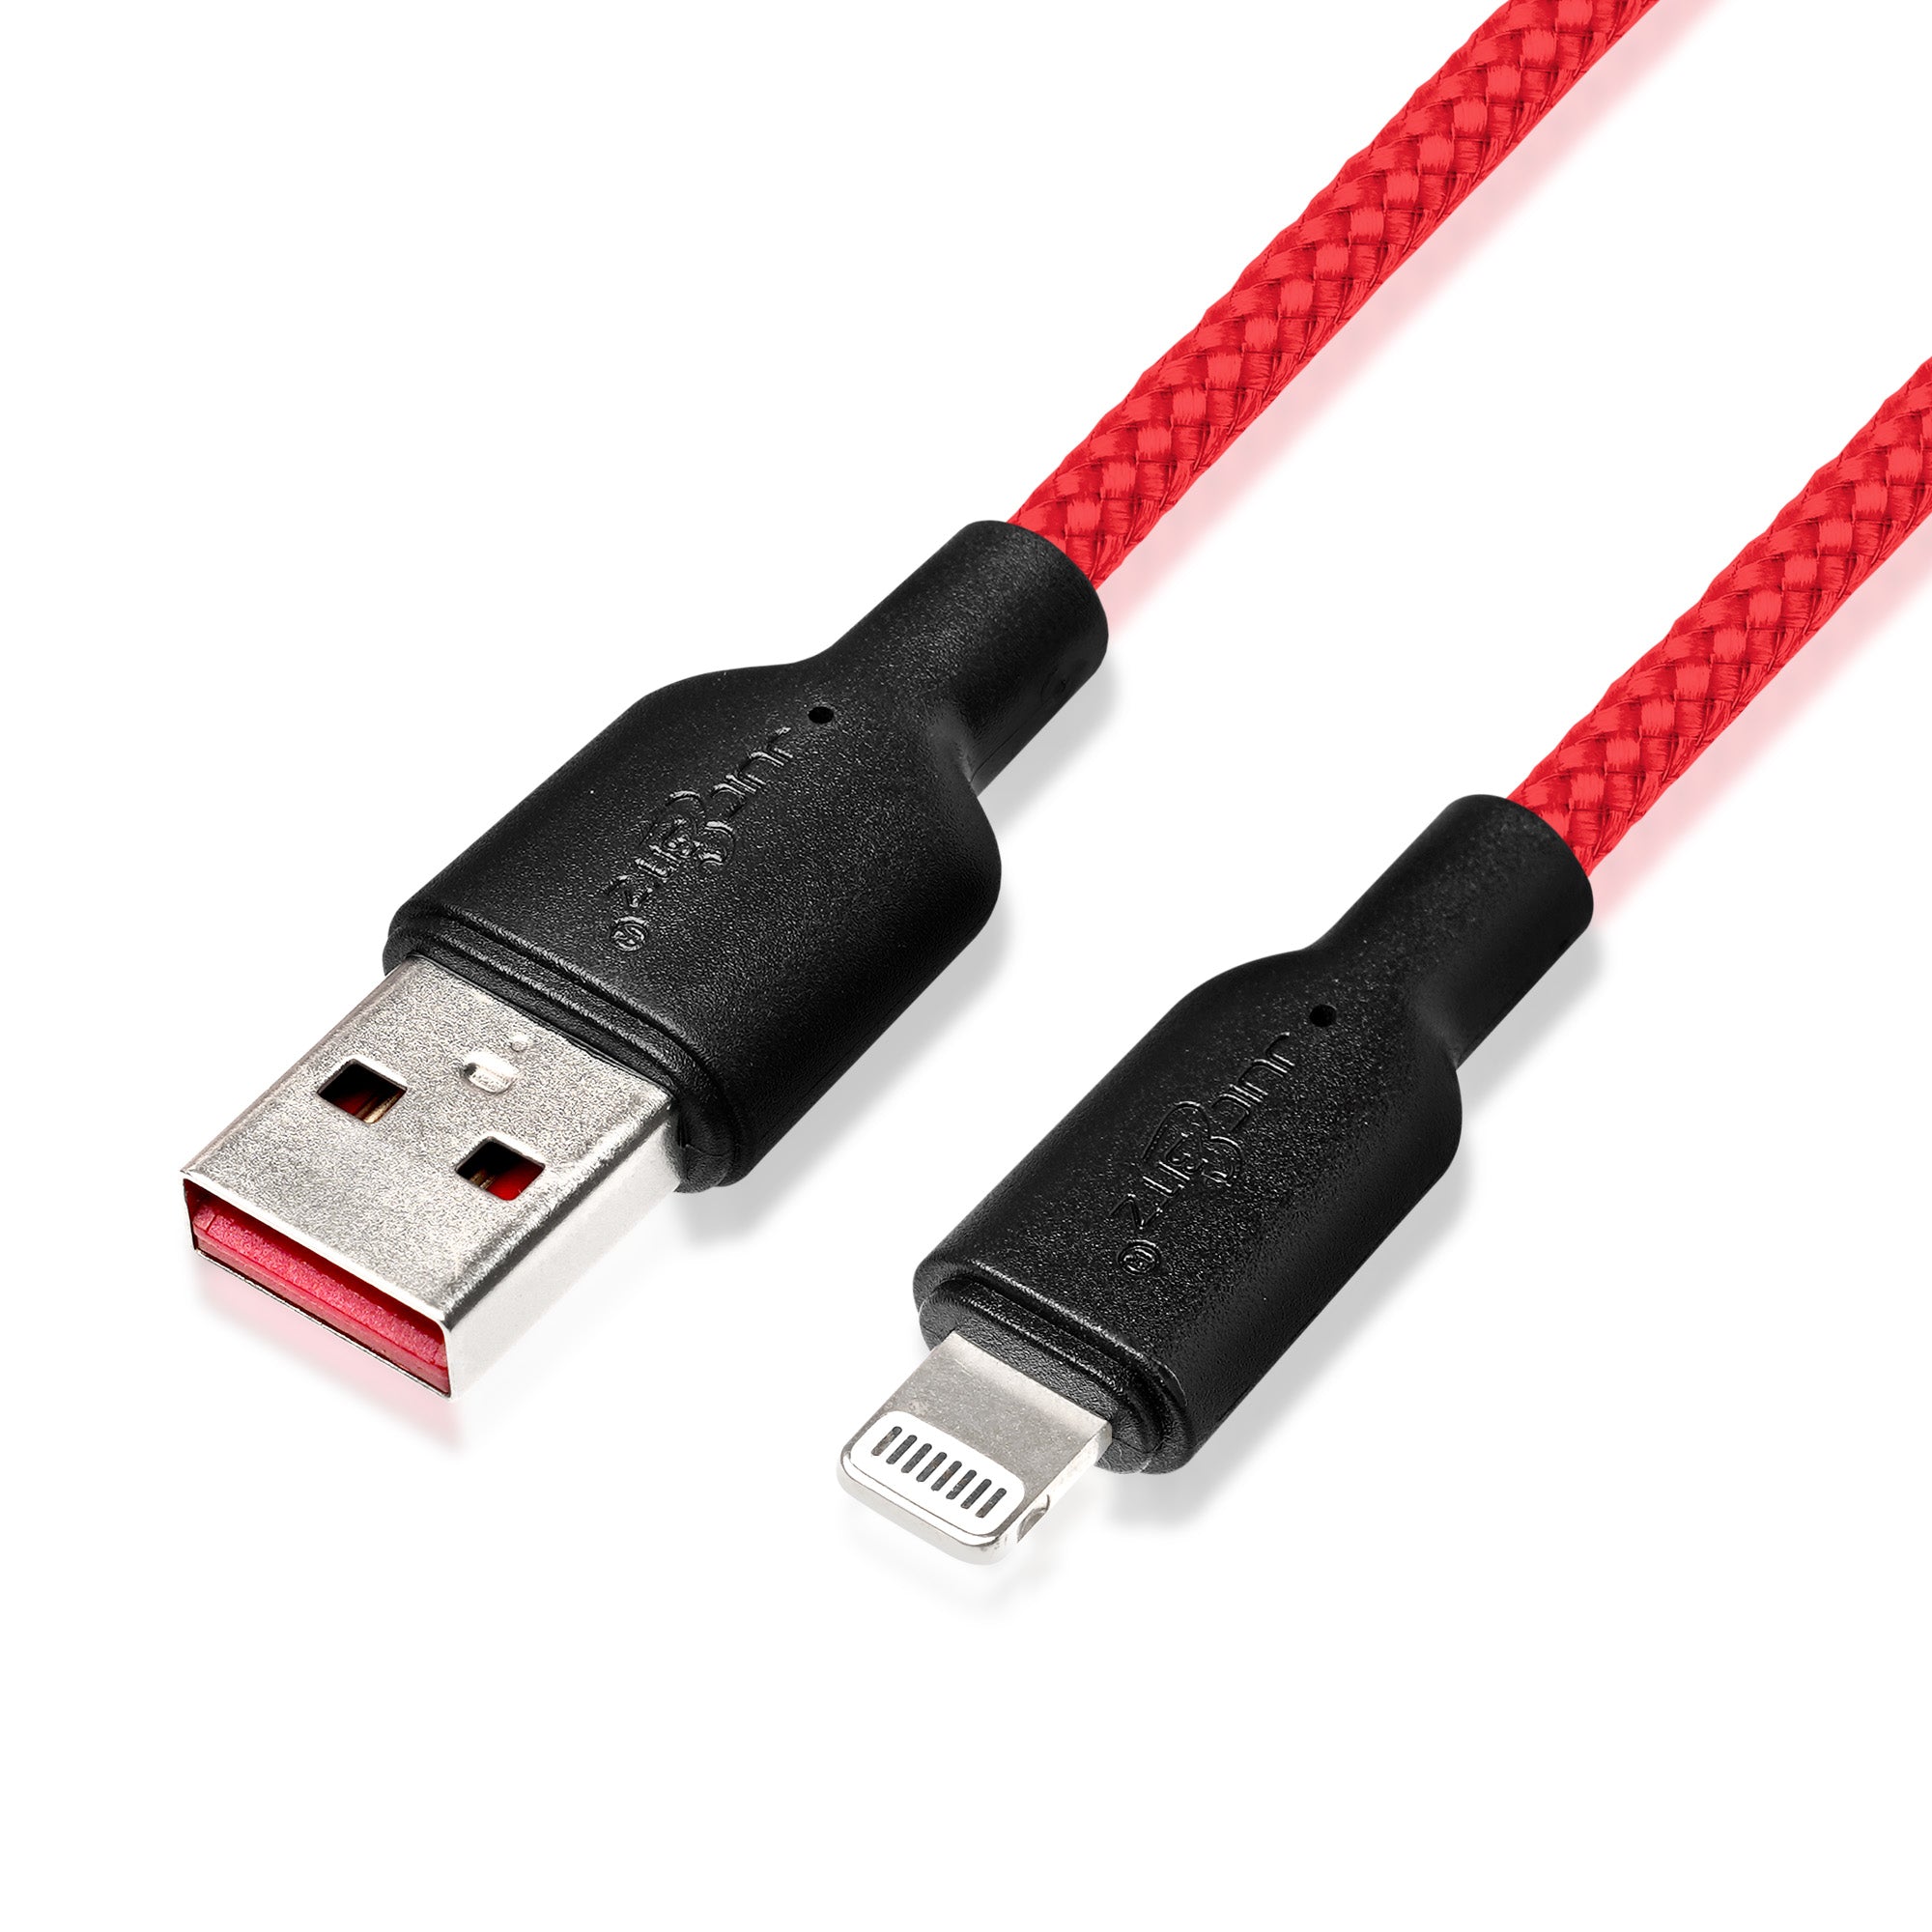 Braided Heavy Duty USB Charger Cable Data Sync Wire Lead for iPhone, iPad, iPod - Red